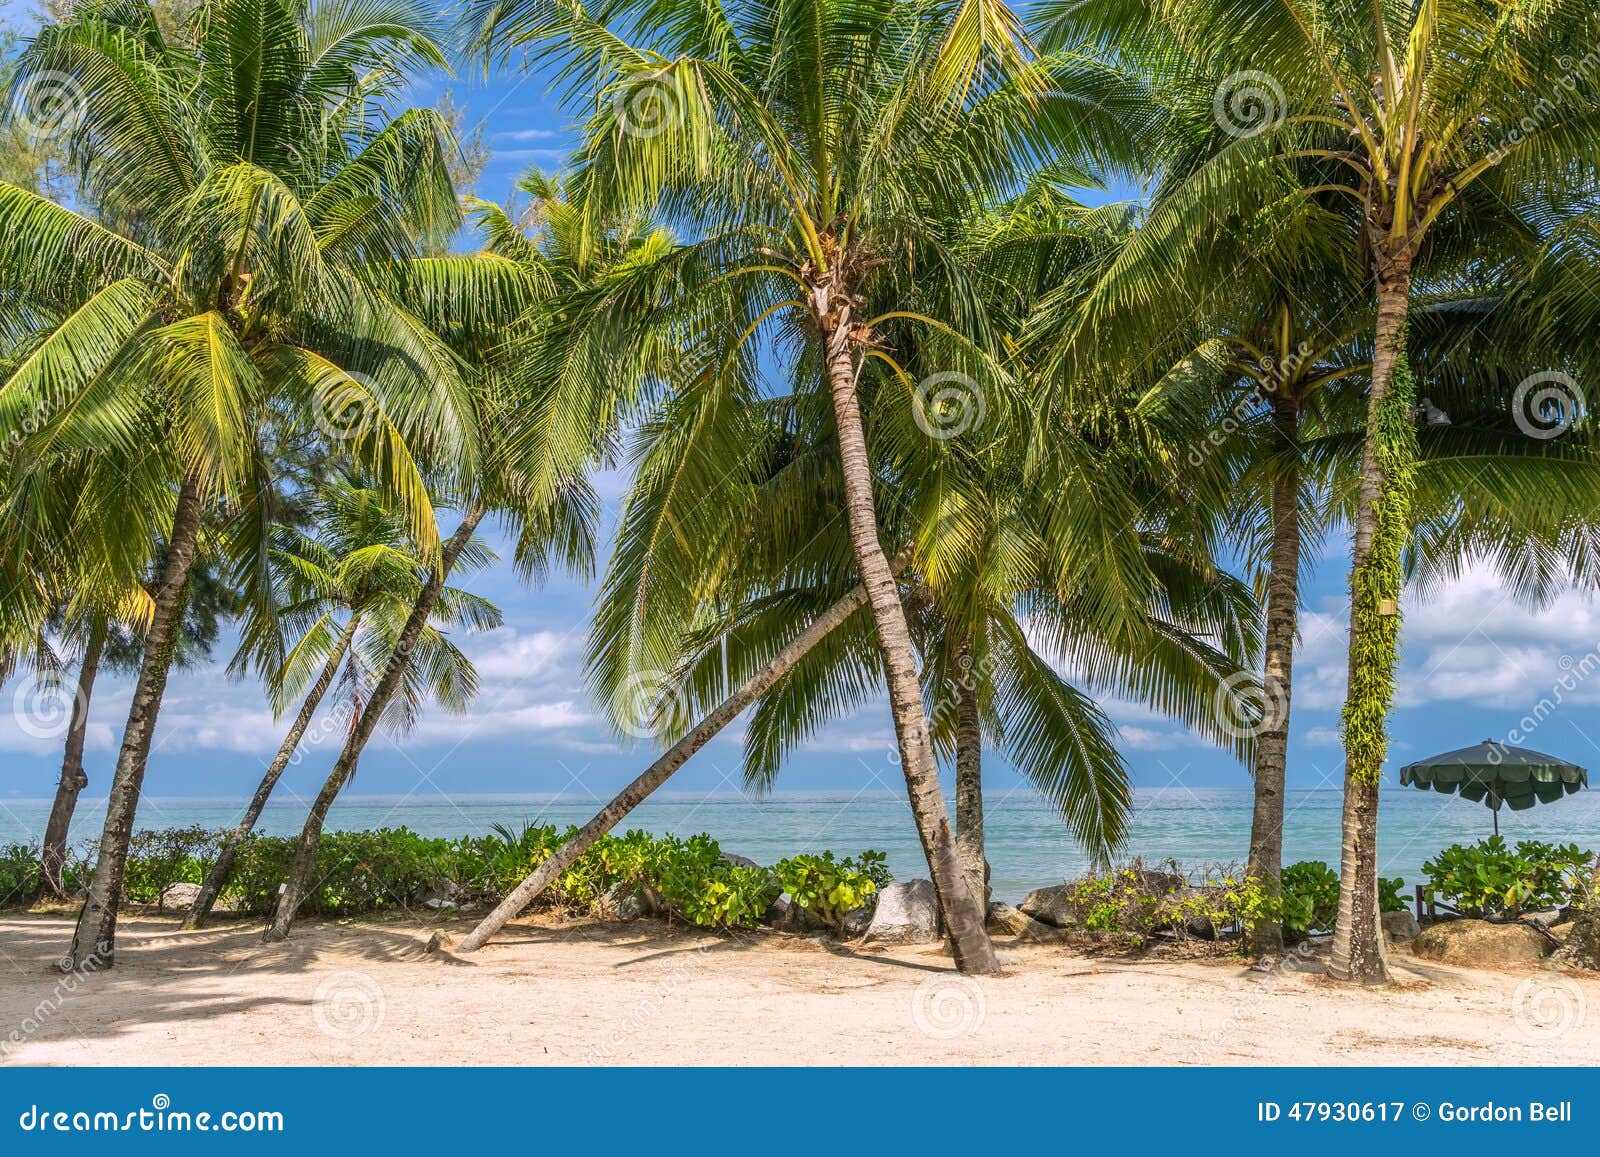 Palm Trees Blowing in a Warm Ocean Breeze Stock Image - Image of ...